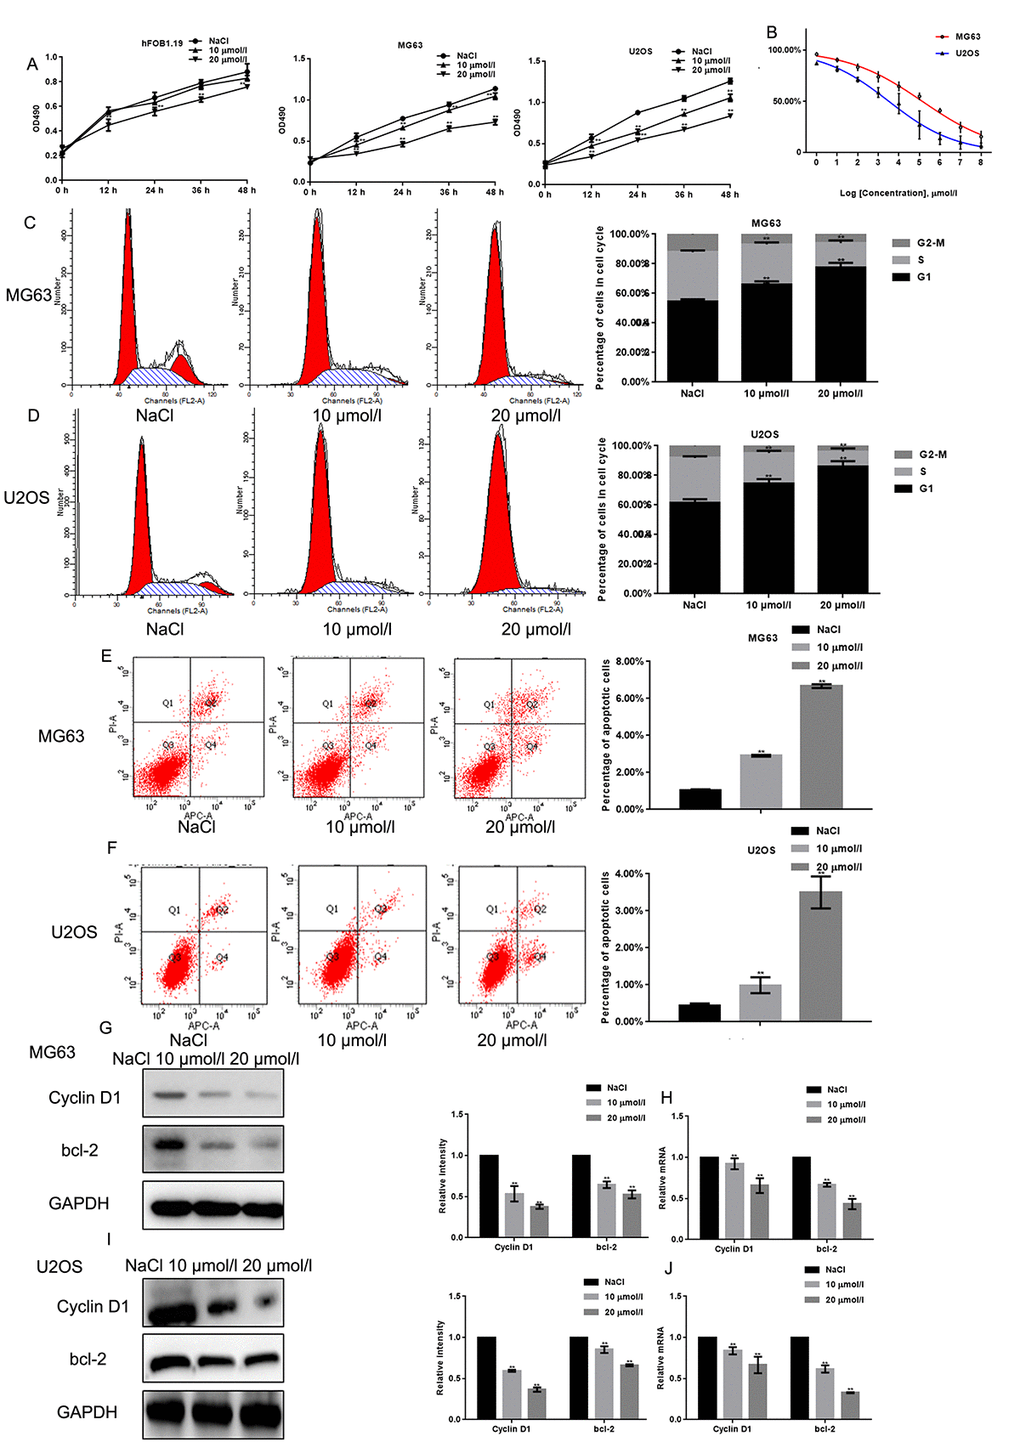 Naringin inhibits the proliferation of osteosarcoma cells. (A) Results of MTT proliferation assays in hFOB1.19, MG63, and U2OS cells cultured with various concentrations of naringin for different times. Results represent the mean ± SD of three experiments done in triplicate. **P B) Proliferation inhibition rates induced by naringin on MG63 and U2OS cells. IC50 values were calculated through linear regression. (C, D) Flow cytometric analysis of cell cycle distribution in MG63 and U2OS cells pre-incubated with or without naringin for 24 h and stained with PI. The experiment was repeated three times. **P E, F) Flow cytometric assay of apoptosis in MG63 and U2OS cells pre-incubated with or without naringin for 24 h and stained with Annexin V-FITC/PI. The experiment was repeated three times. **P G-J) Expression of Cyclin D1 and bcl-2 detected by Western blot and real-time PCR in MG63 and U2OS cells treated with NaCl or naringin for 24 h. **P 